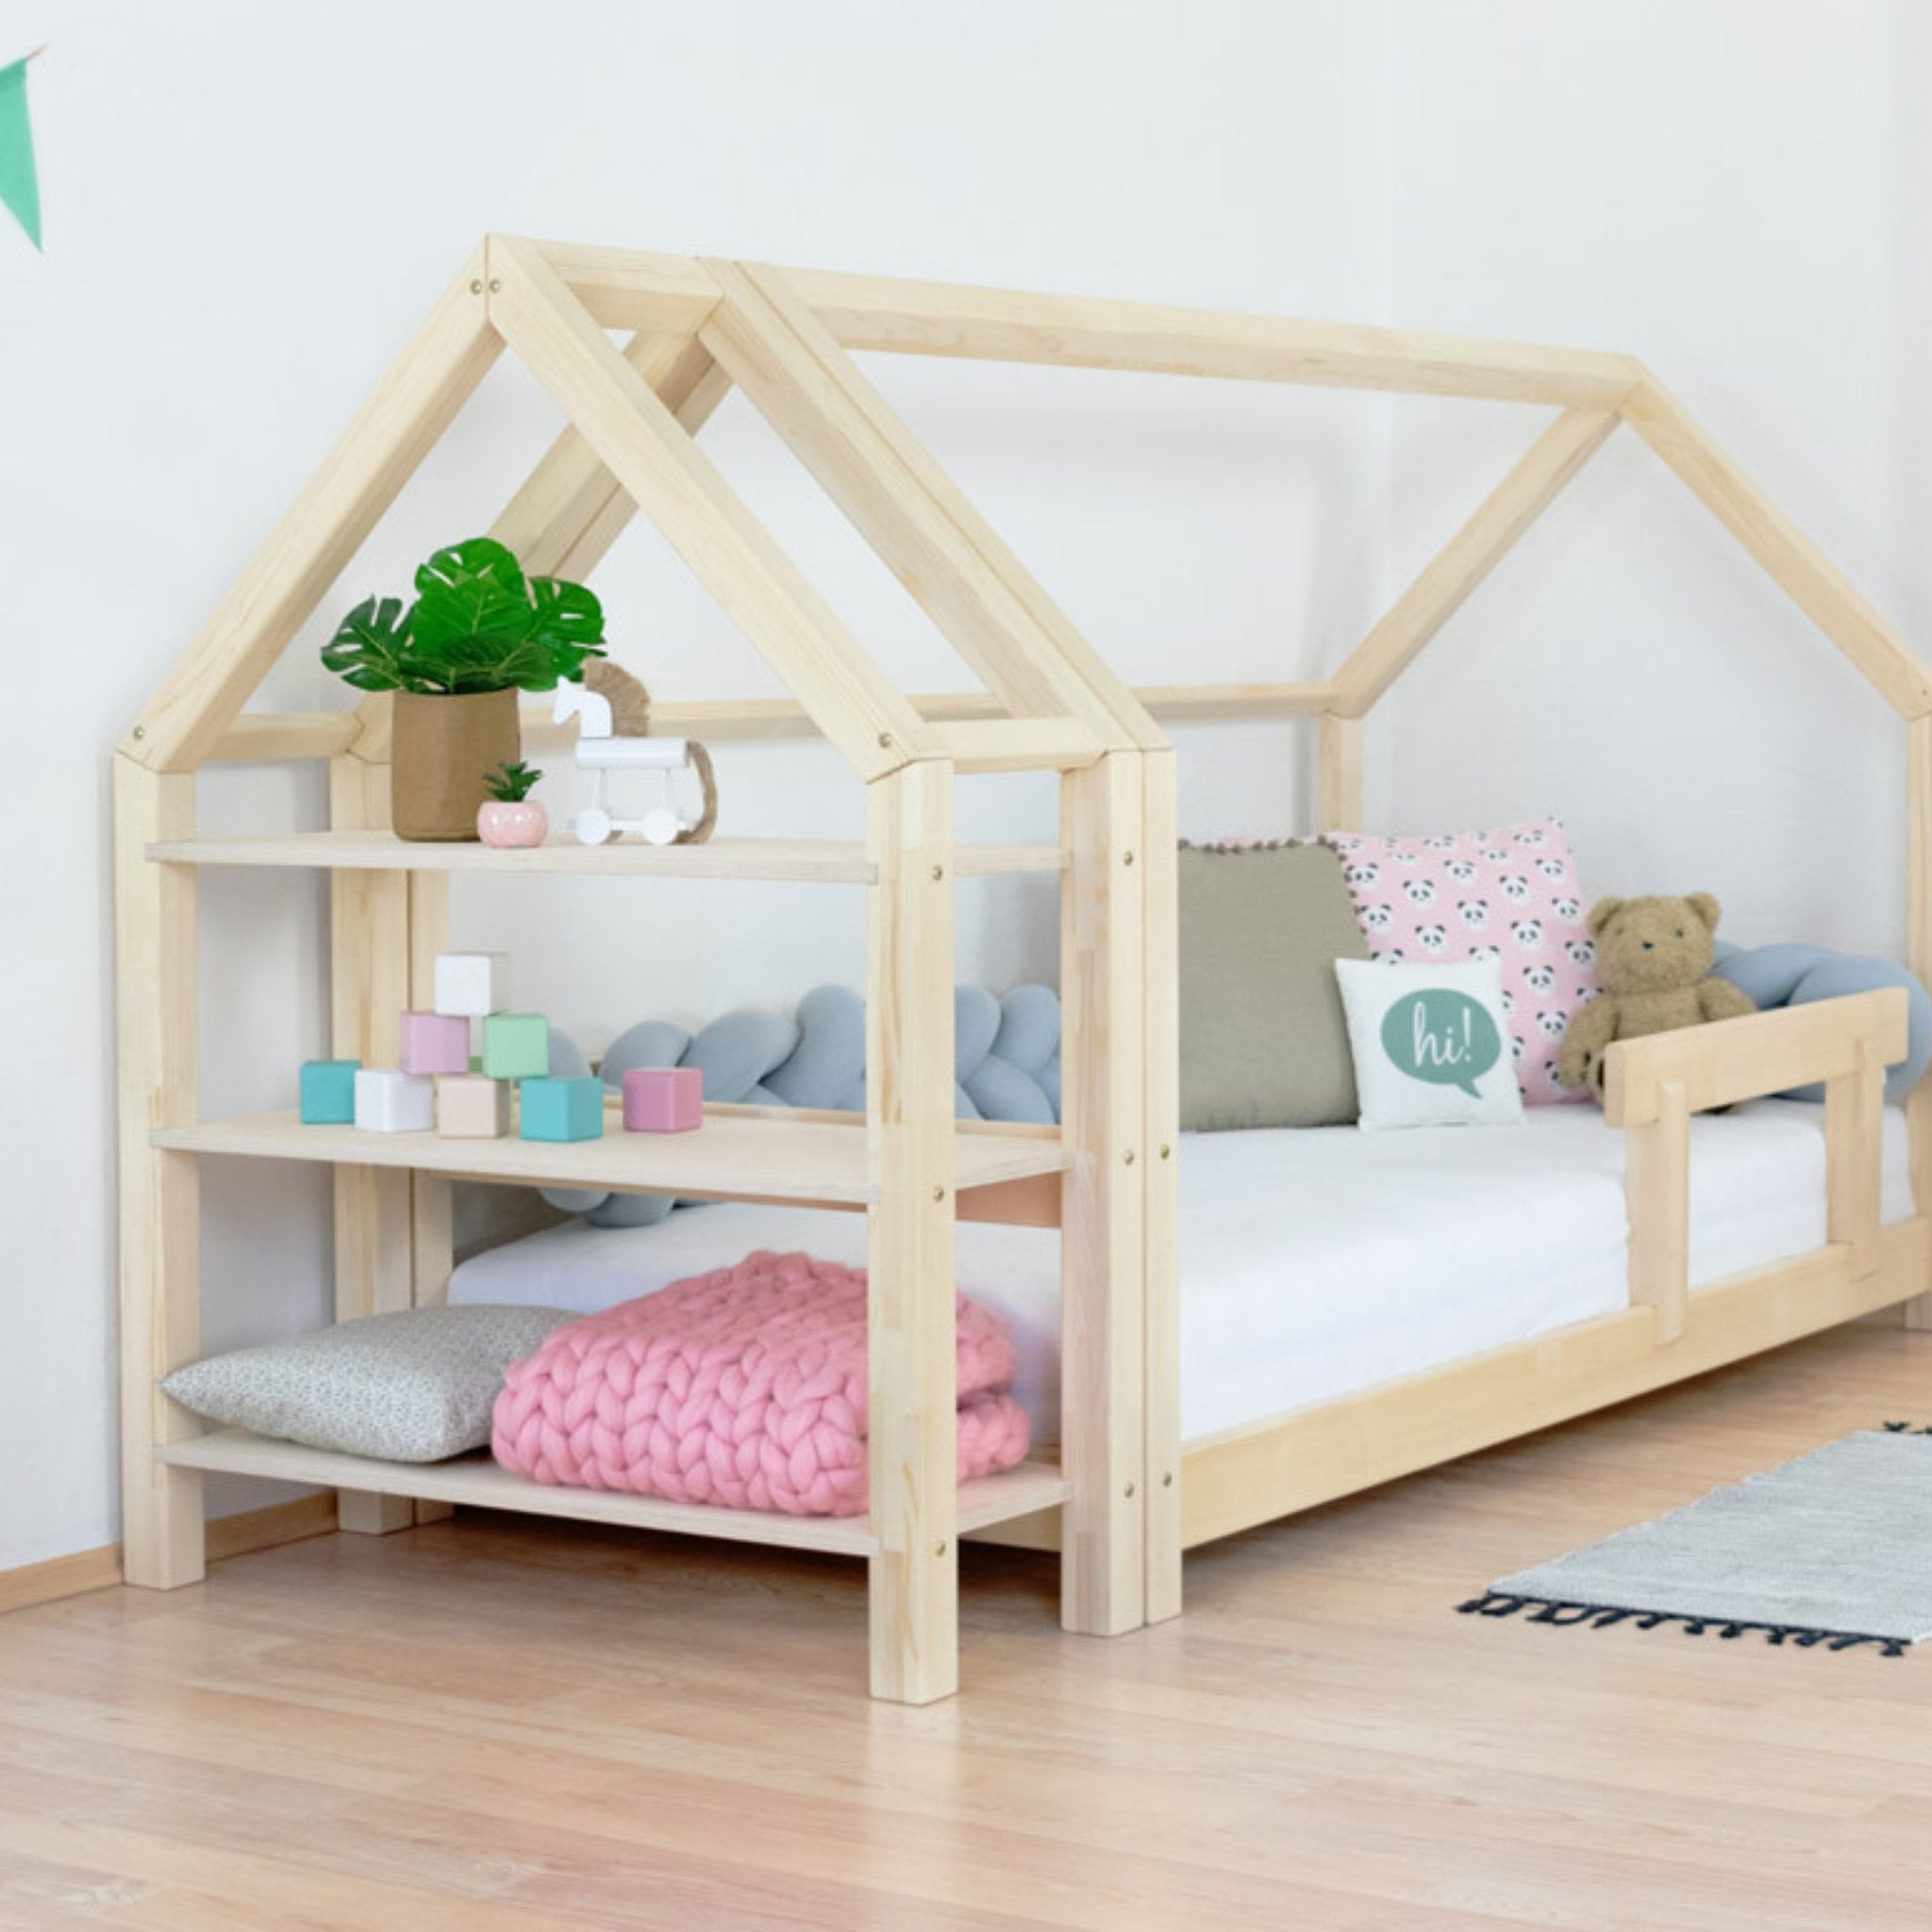 Wooden Children's House Bed TERY - Natural - Mobilia Vita